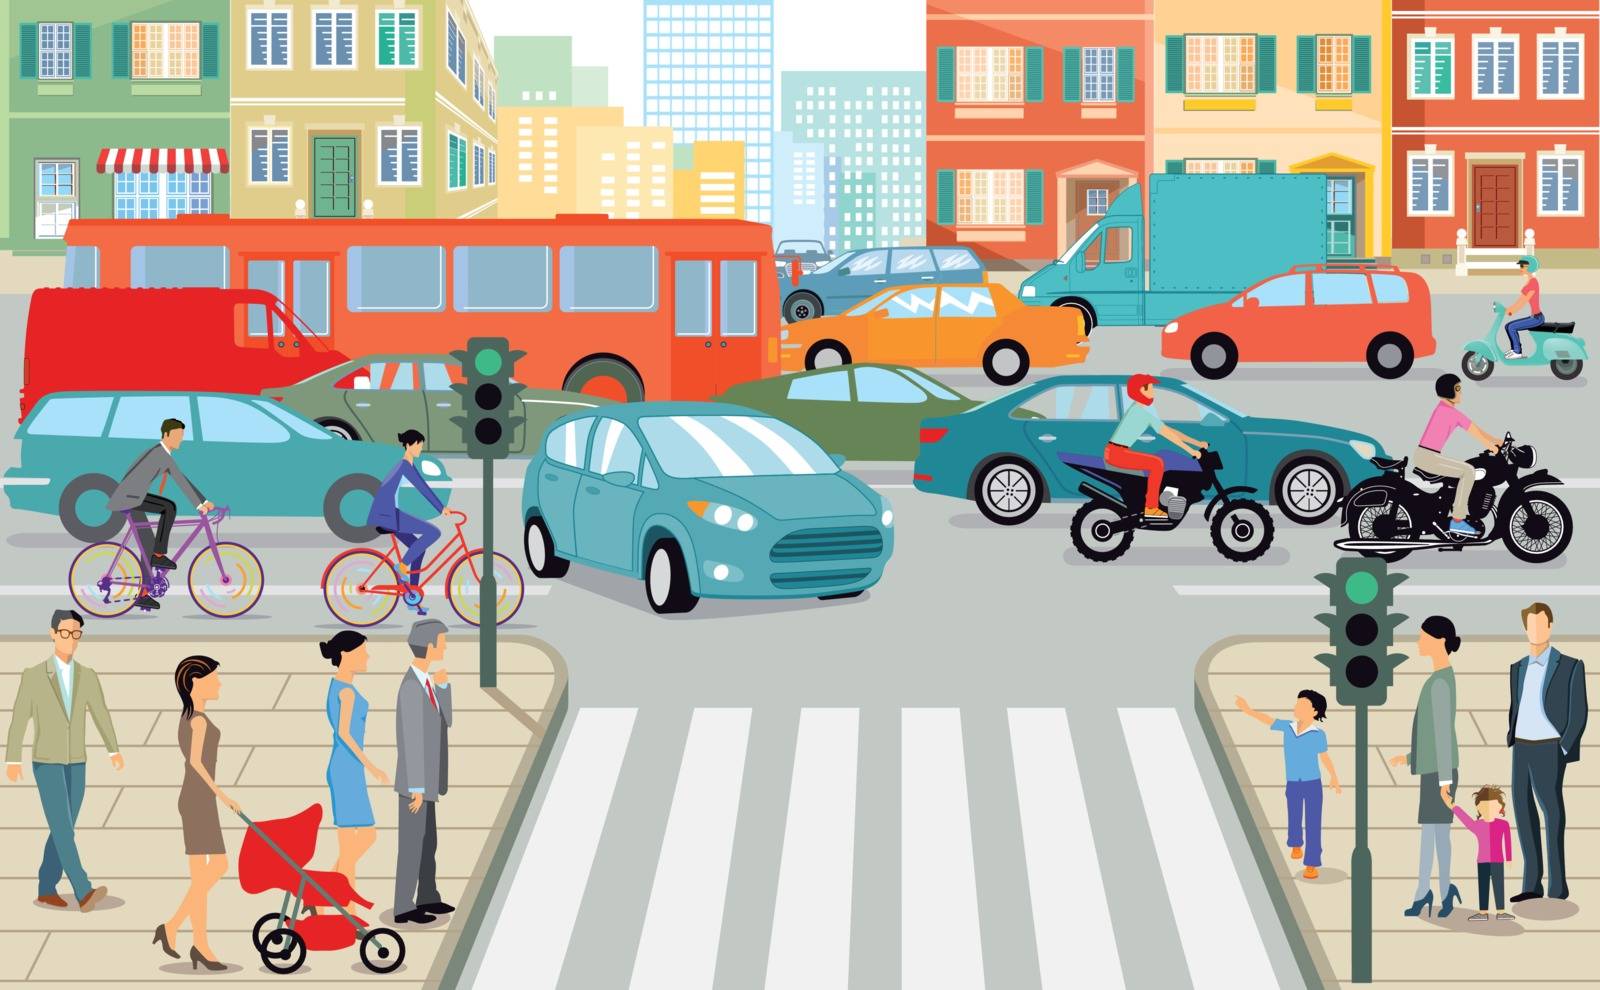 Road traffic in the city, illustration